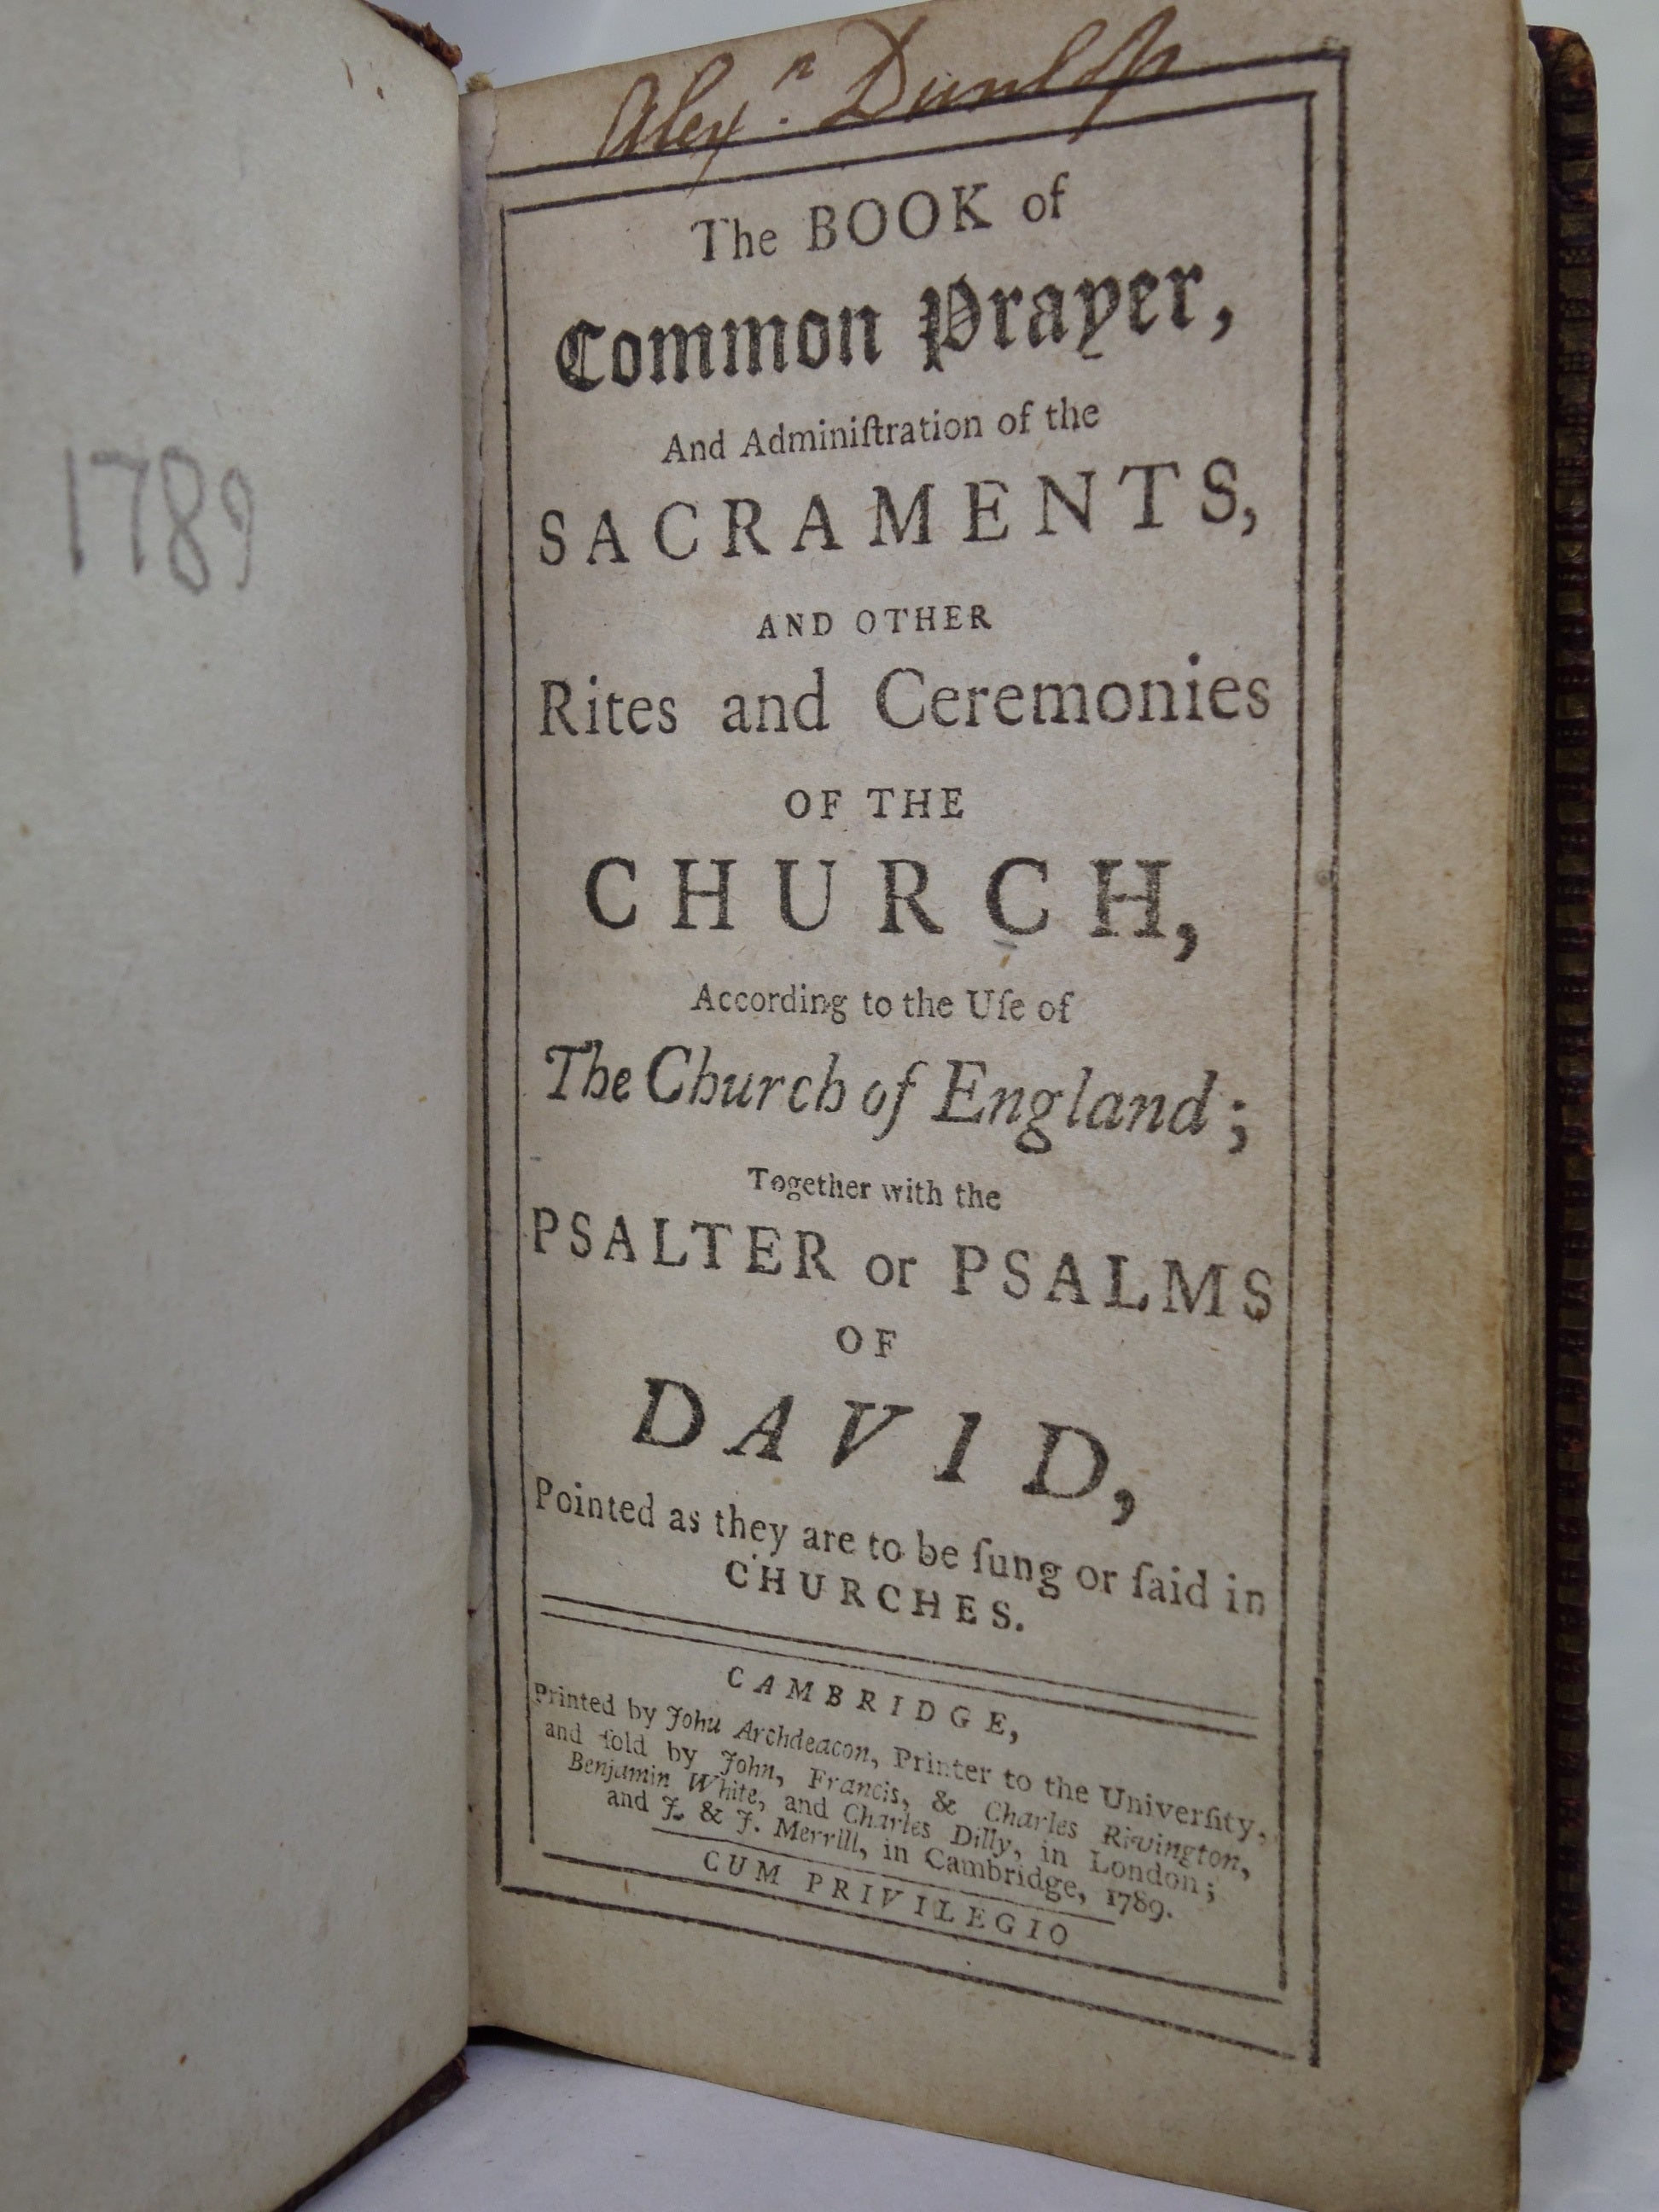 THE BOOK OF COMMON PRAYER 1789 FINE LEATHER BINDING